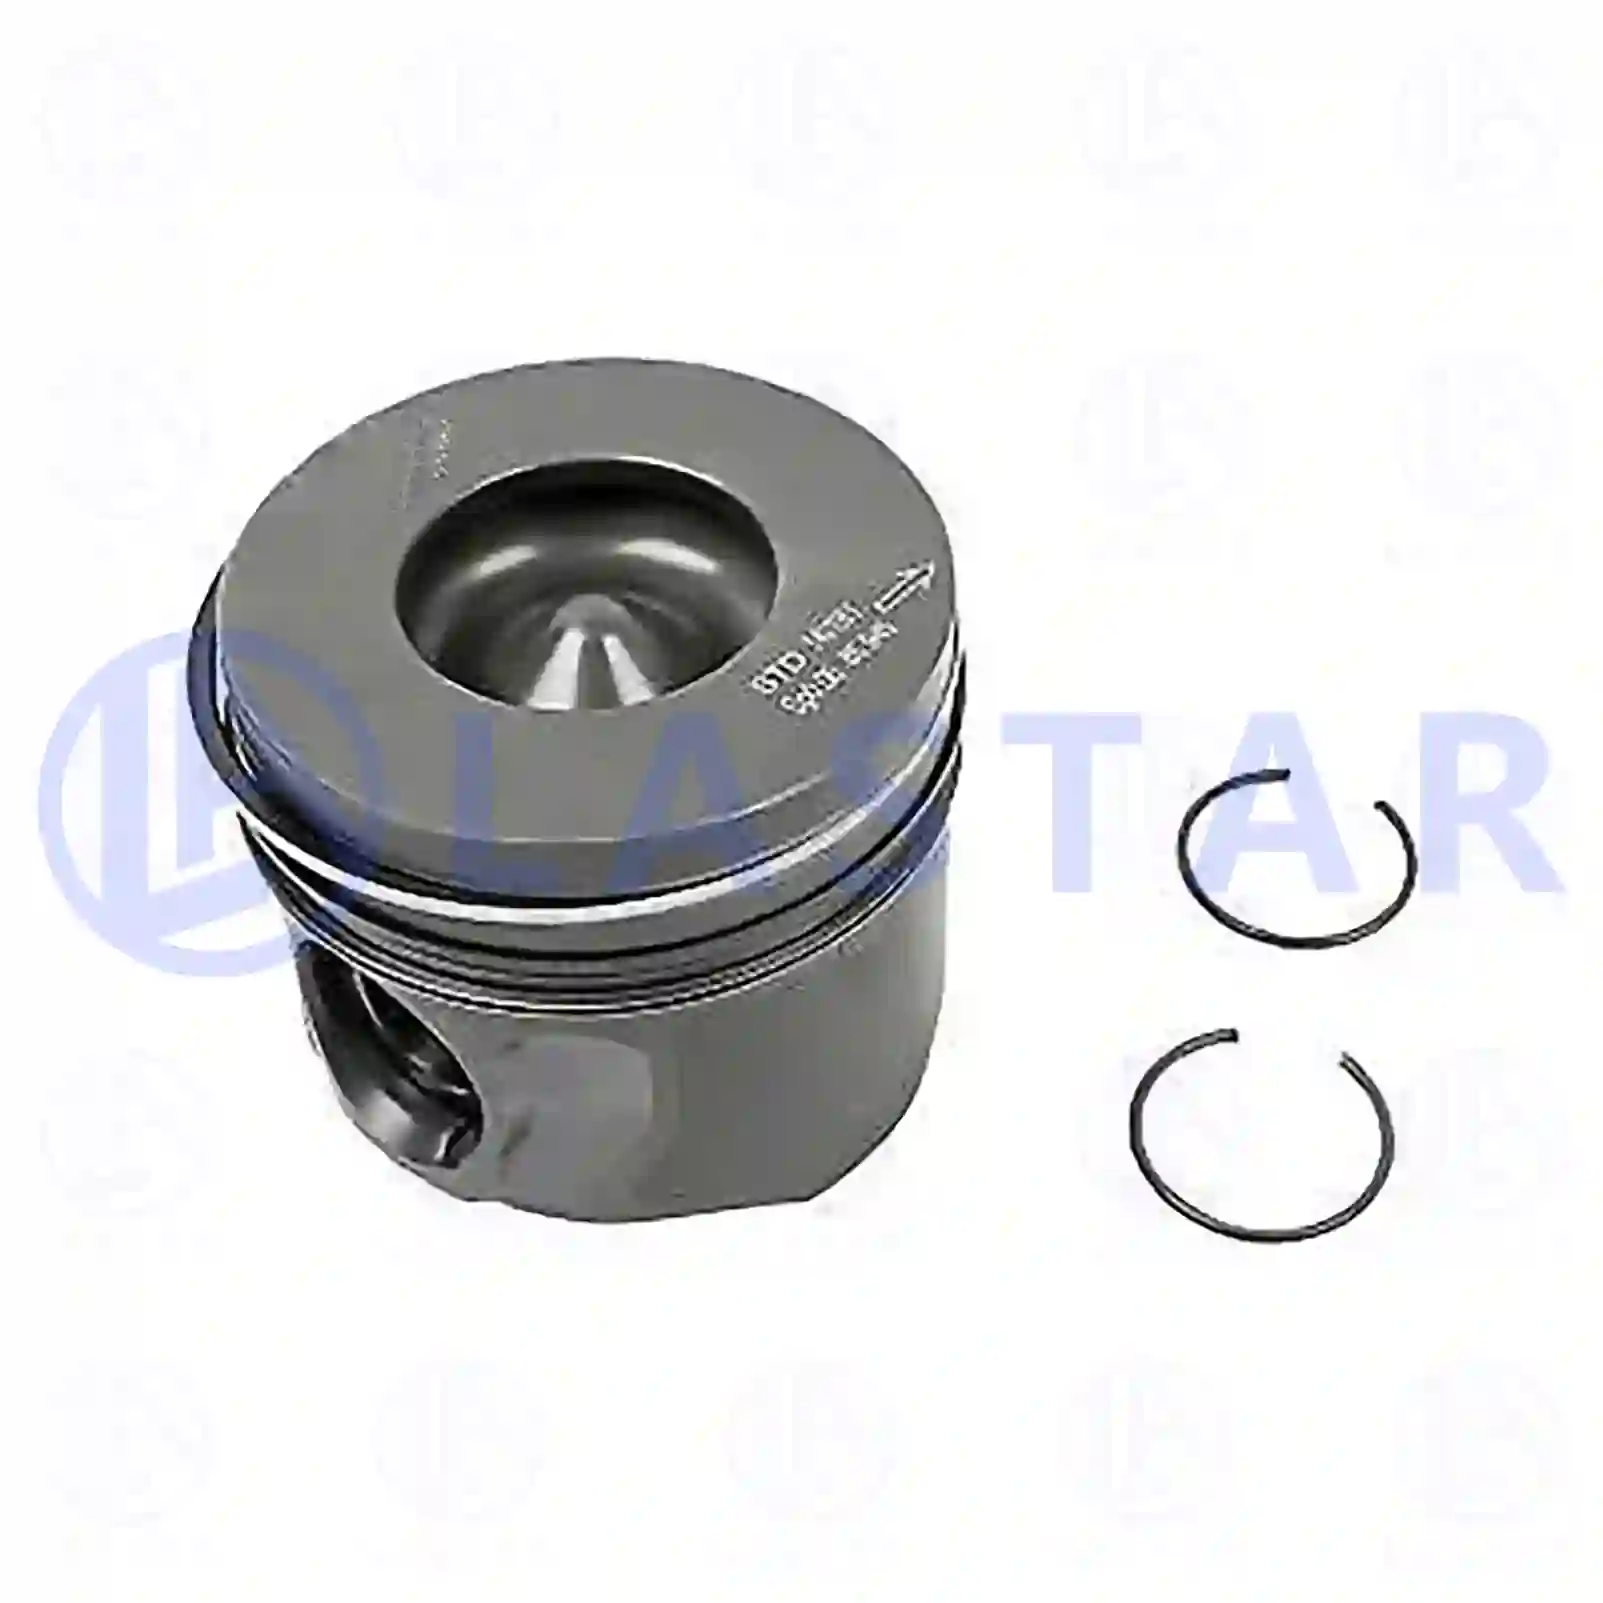 Piston, complete with rings, 77700679, 1201216, 1349797, 3S7Q-6K100-DAA ||  77700679 Lastar Spare Part | Truck Spare Parts, Auotomotive Spare Parts Piston, complete with rings, 77700679, 1201216, 1349797, 3S7Q-6K100-DAA ||  77700679 Lastar Spare Part | Truck Spare Parts, Auotomotive Spare Parts